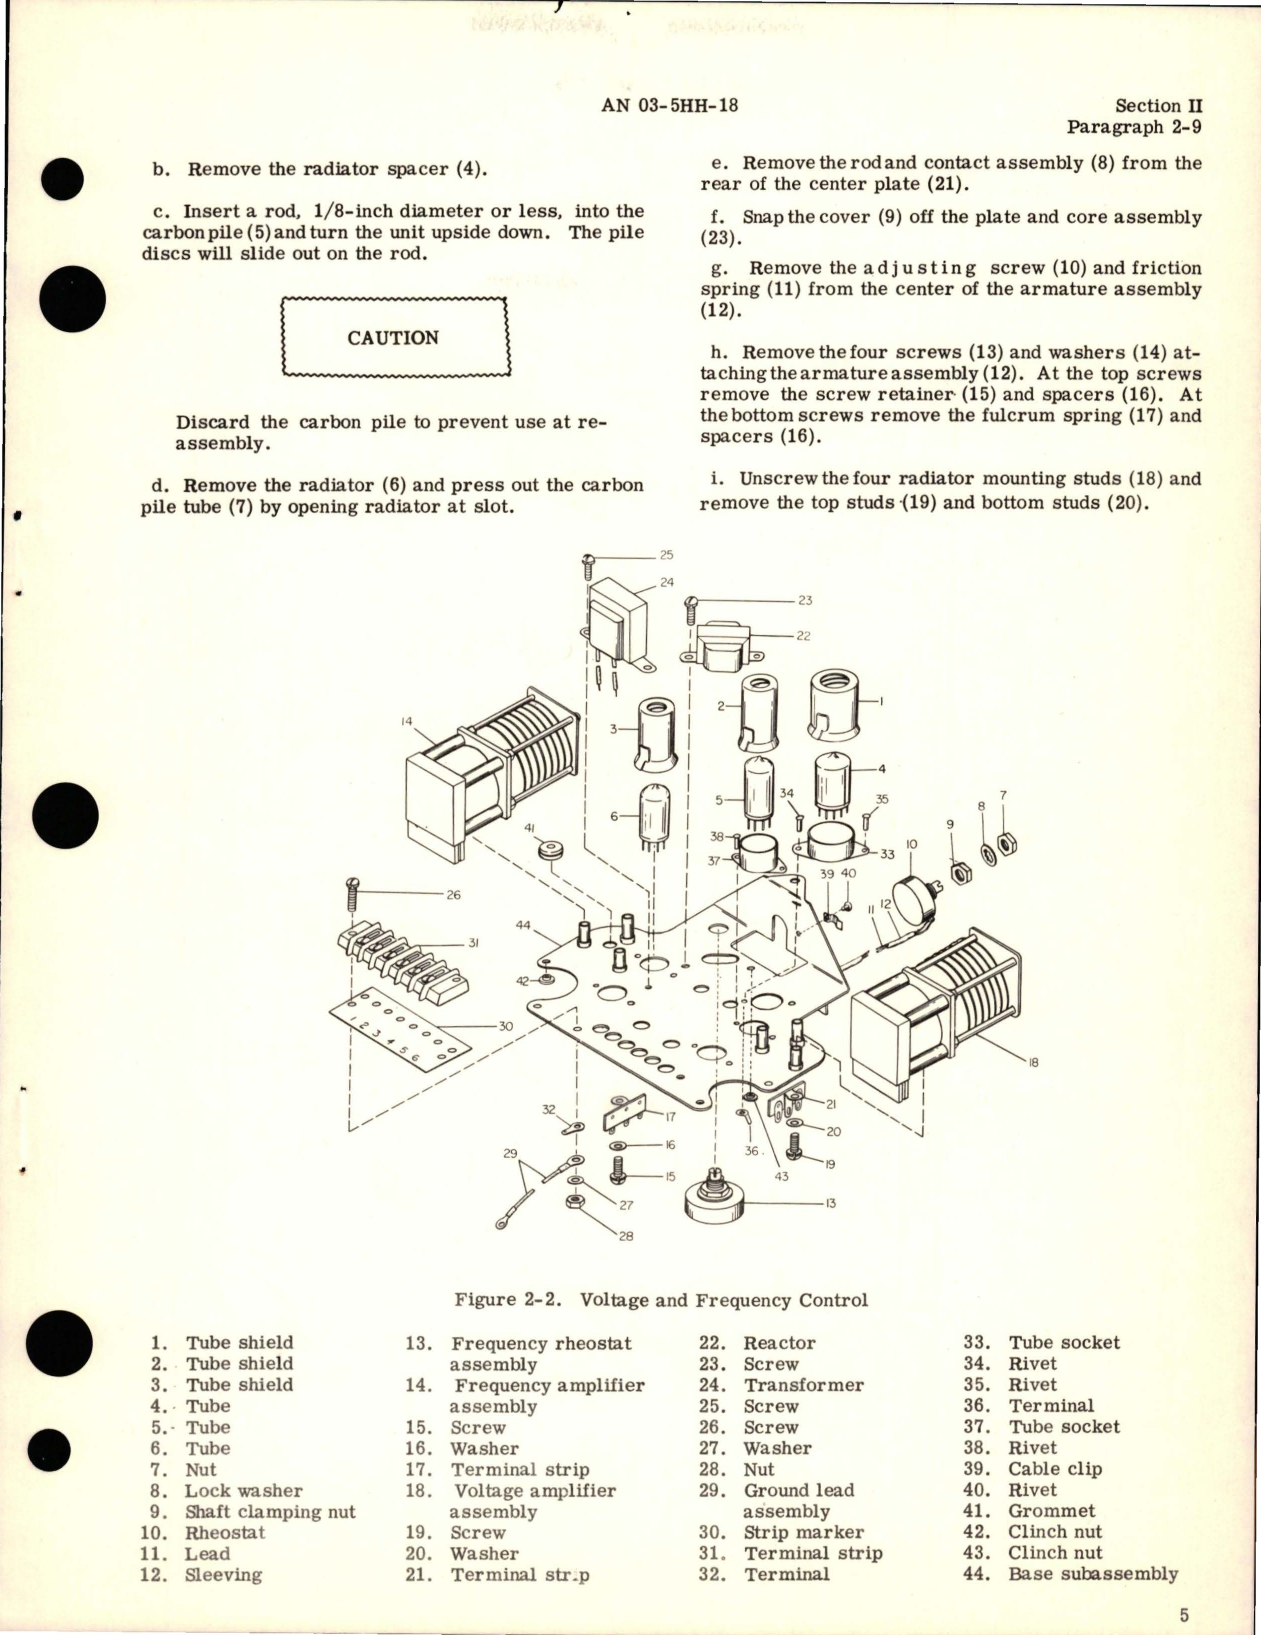 Sample page 9 from AirCorps Library document: Overhaul Instructions for Inverter - Parts SE-8-2 and SE-8-3